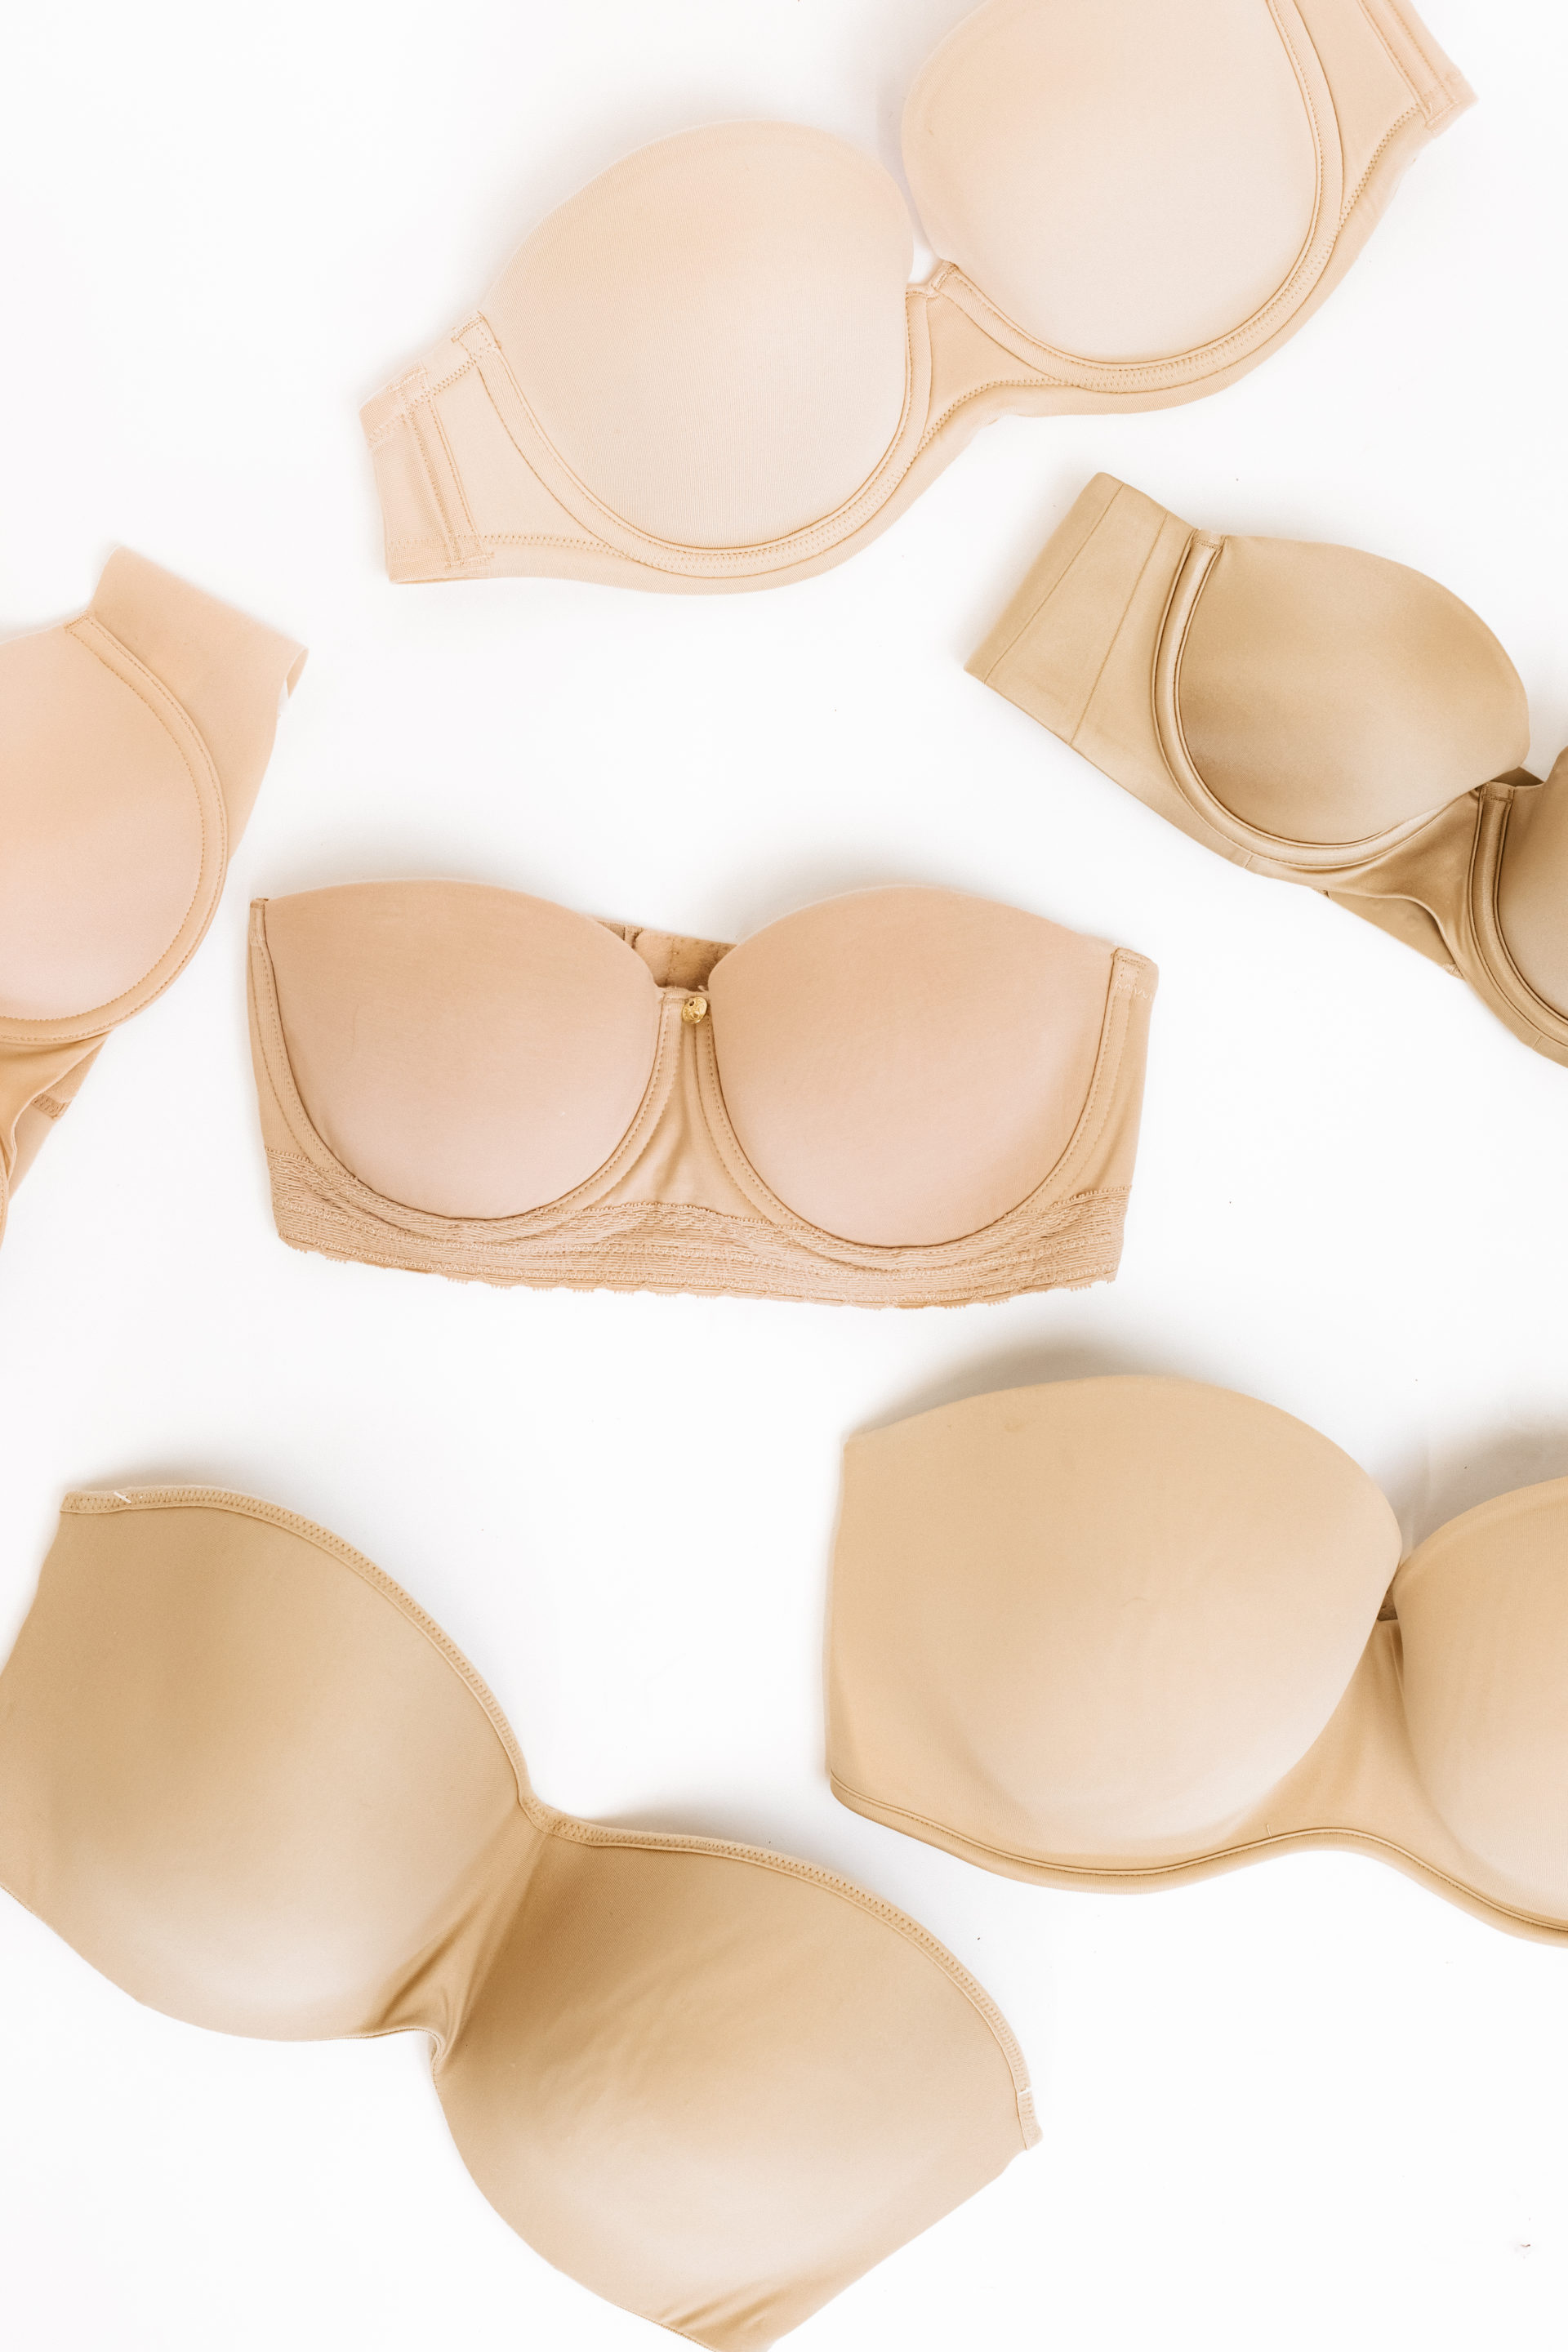 FOUND: The Best Strapless Bra for Your Cup Size // Cup Sizes A-G Tested & Reviewed